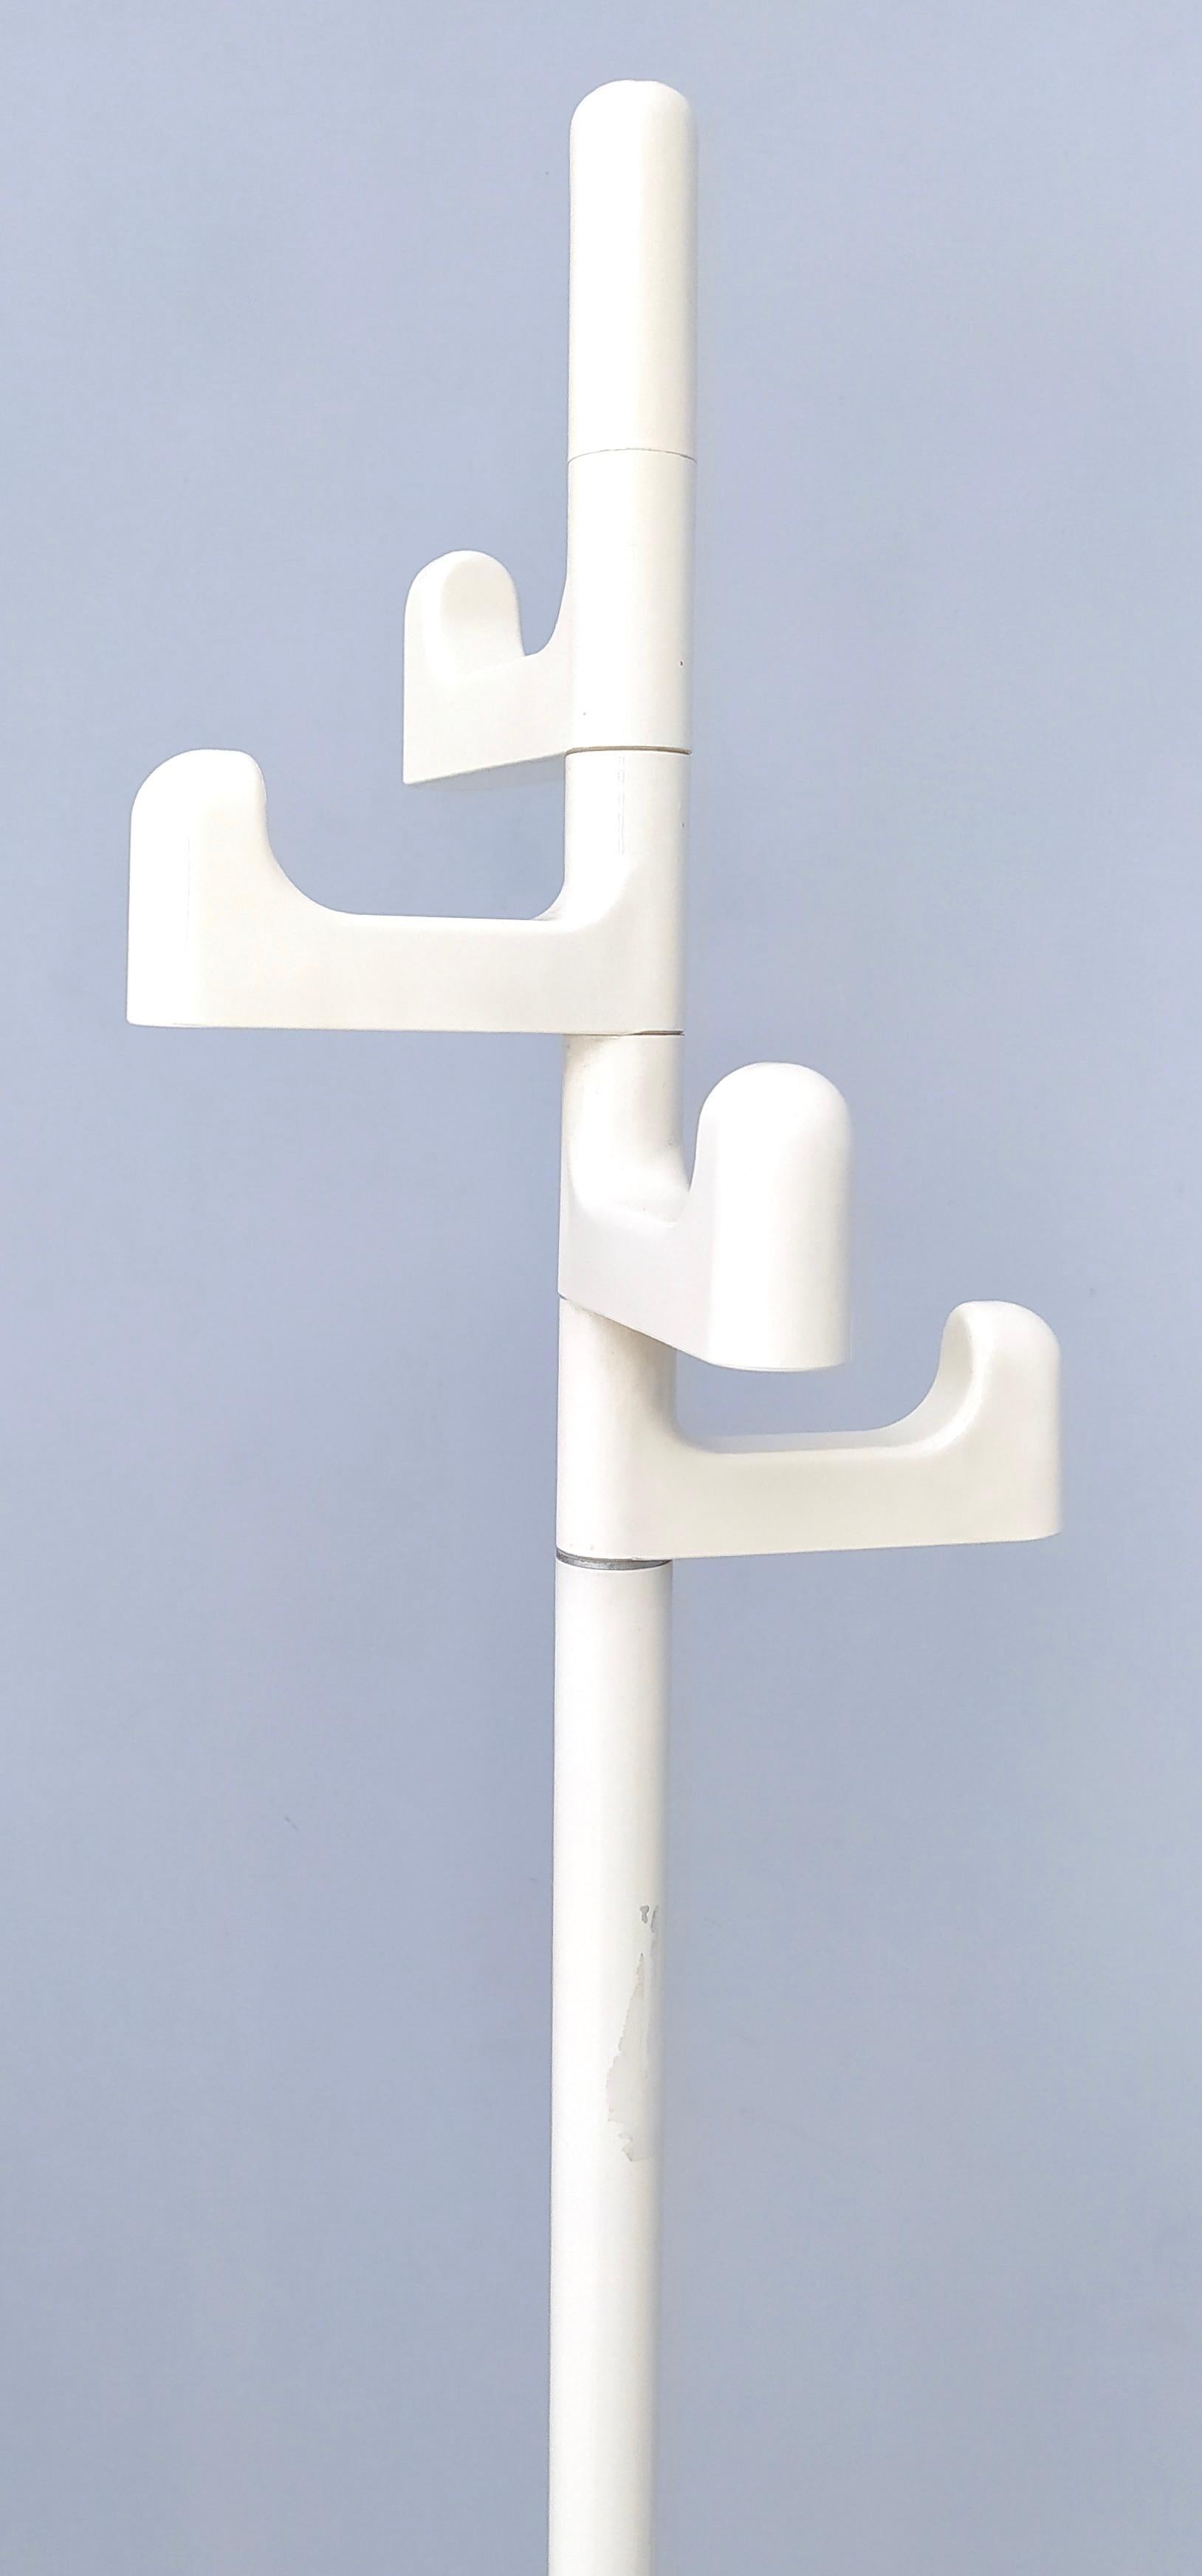 Late 20th Century Postmodern Italian White Towel or Coat Rack by Makio Hasuike for Gedy, Italy